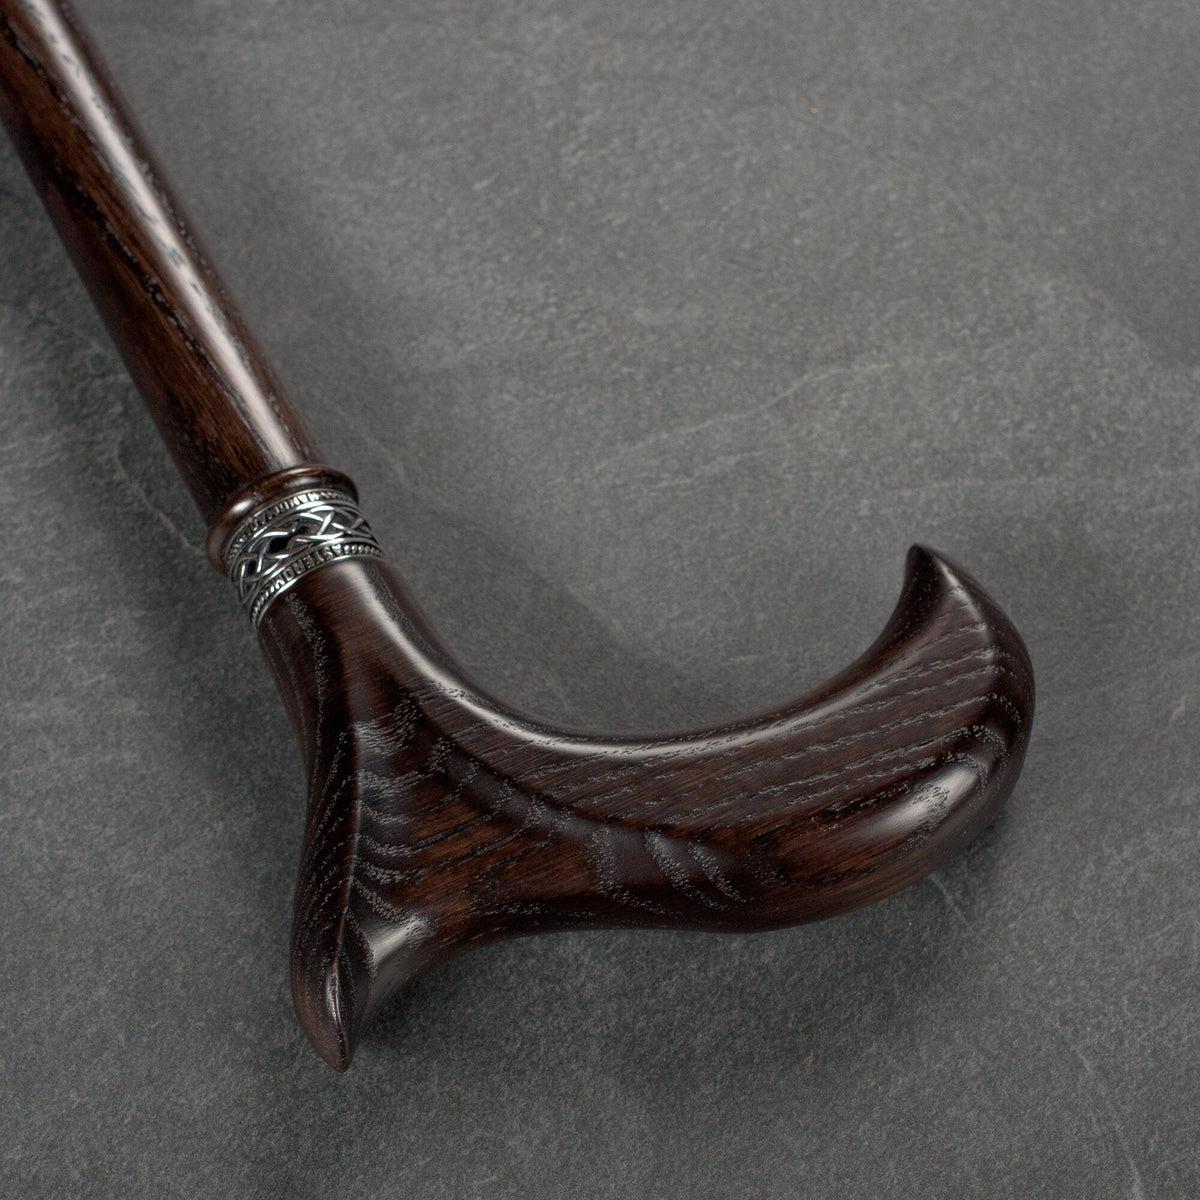 Men or Women Solid Wooden Derby Walking Cane With Palm Grip